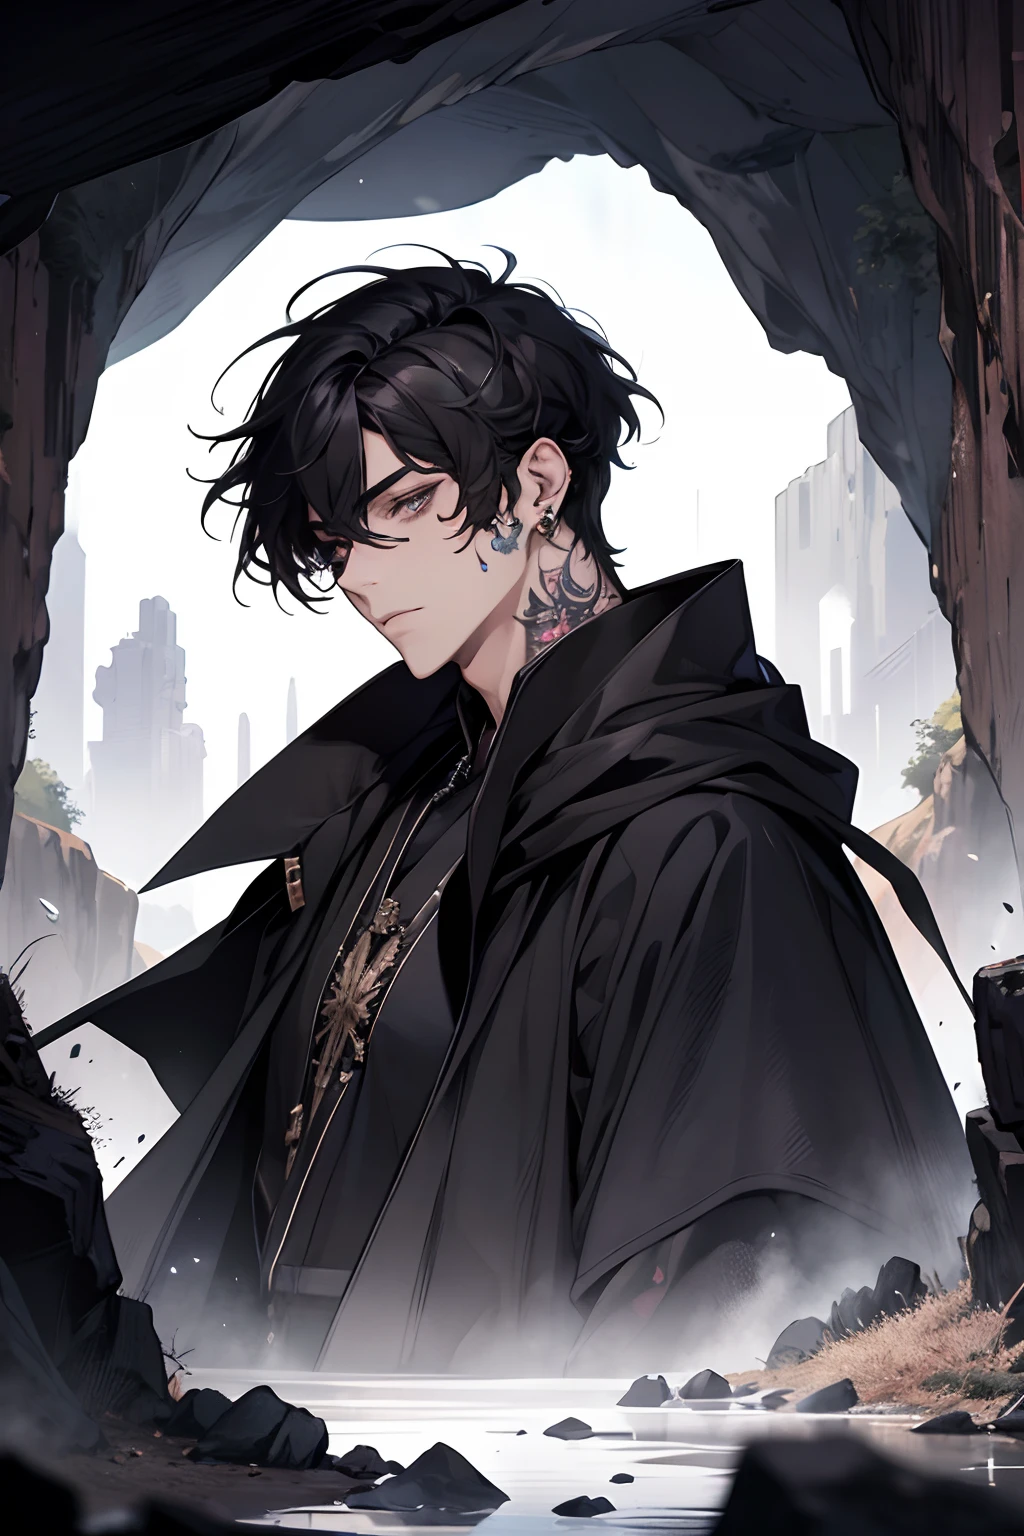 male, messy black hair with bangs, amethyst eyes, adult face, adult, black robes and armor, piercings, lean and handsome, dark fantasy, sorcerer, tattoos, in a cave